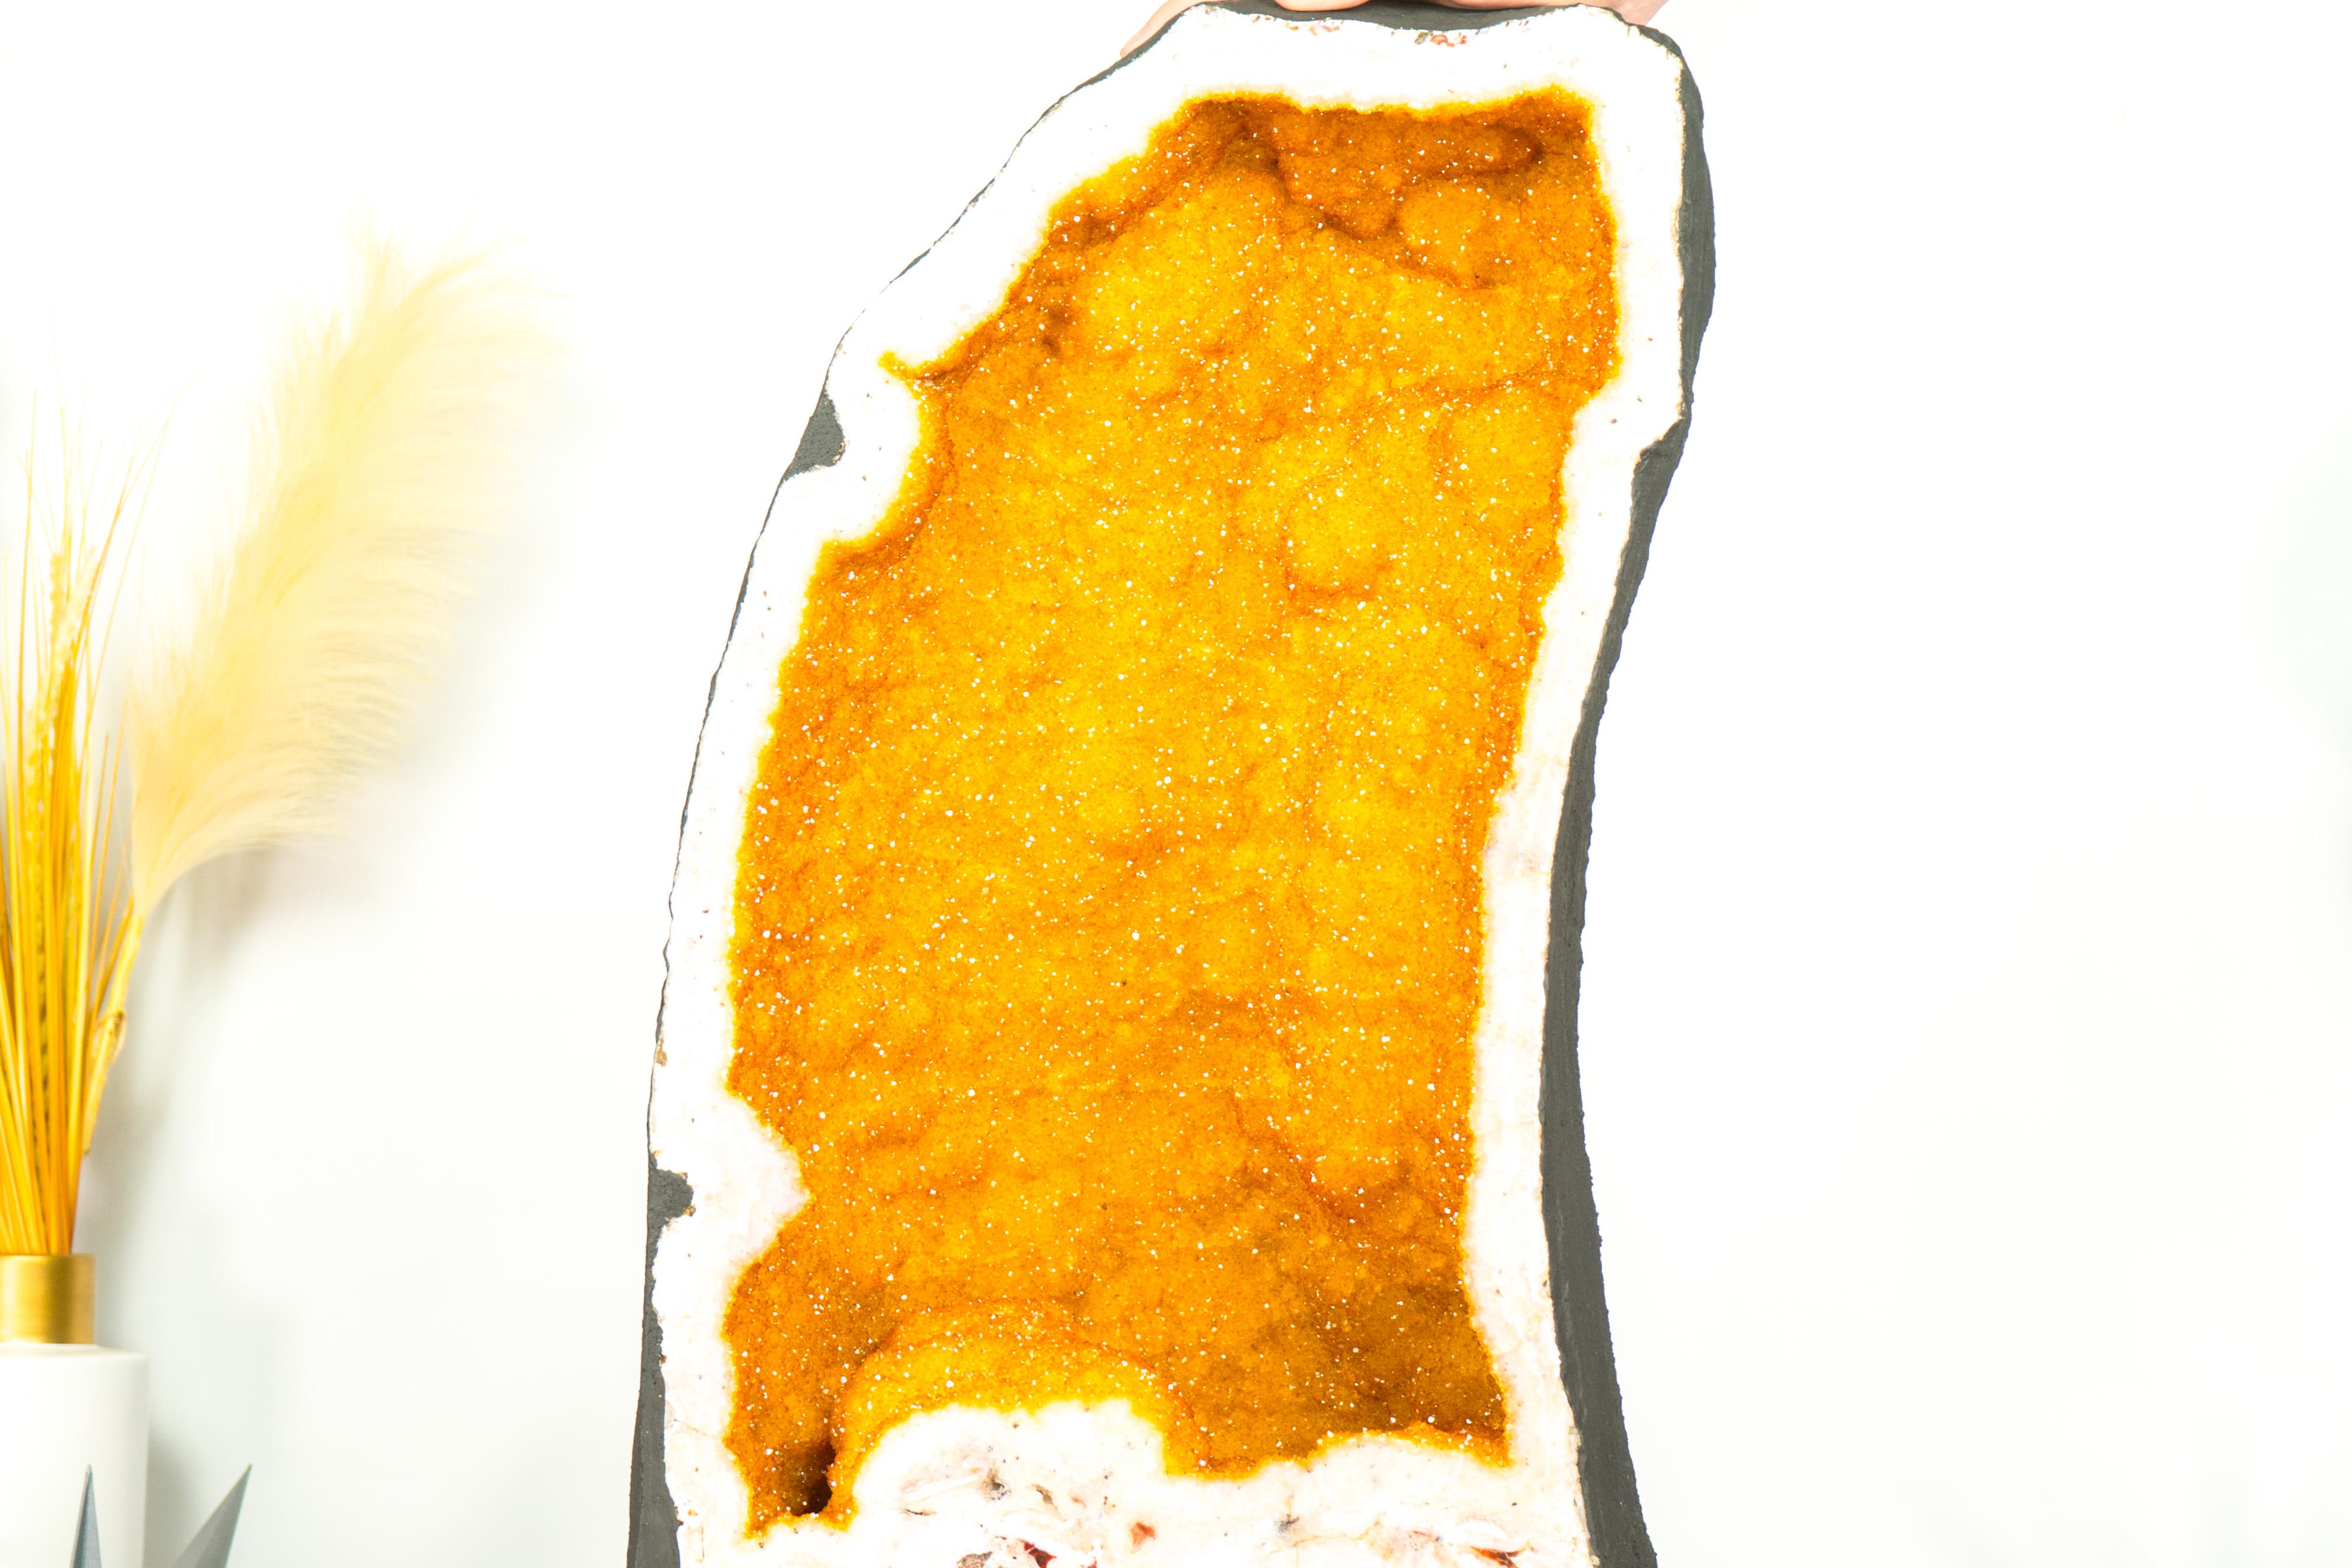 A truly unique and stunning geode, this golden yellow Citrine geode brings together rare characteristics with beautiful aesthetics. It is a geode that will certainly become a statement piece in your collection or a natural artwork to add to your